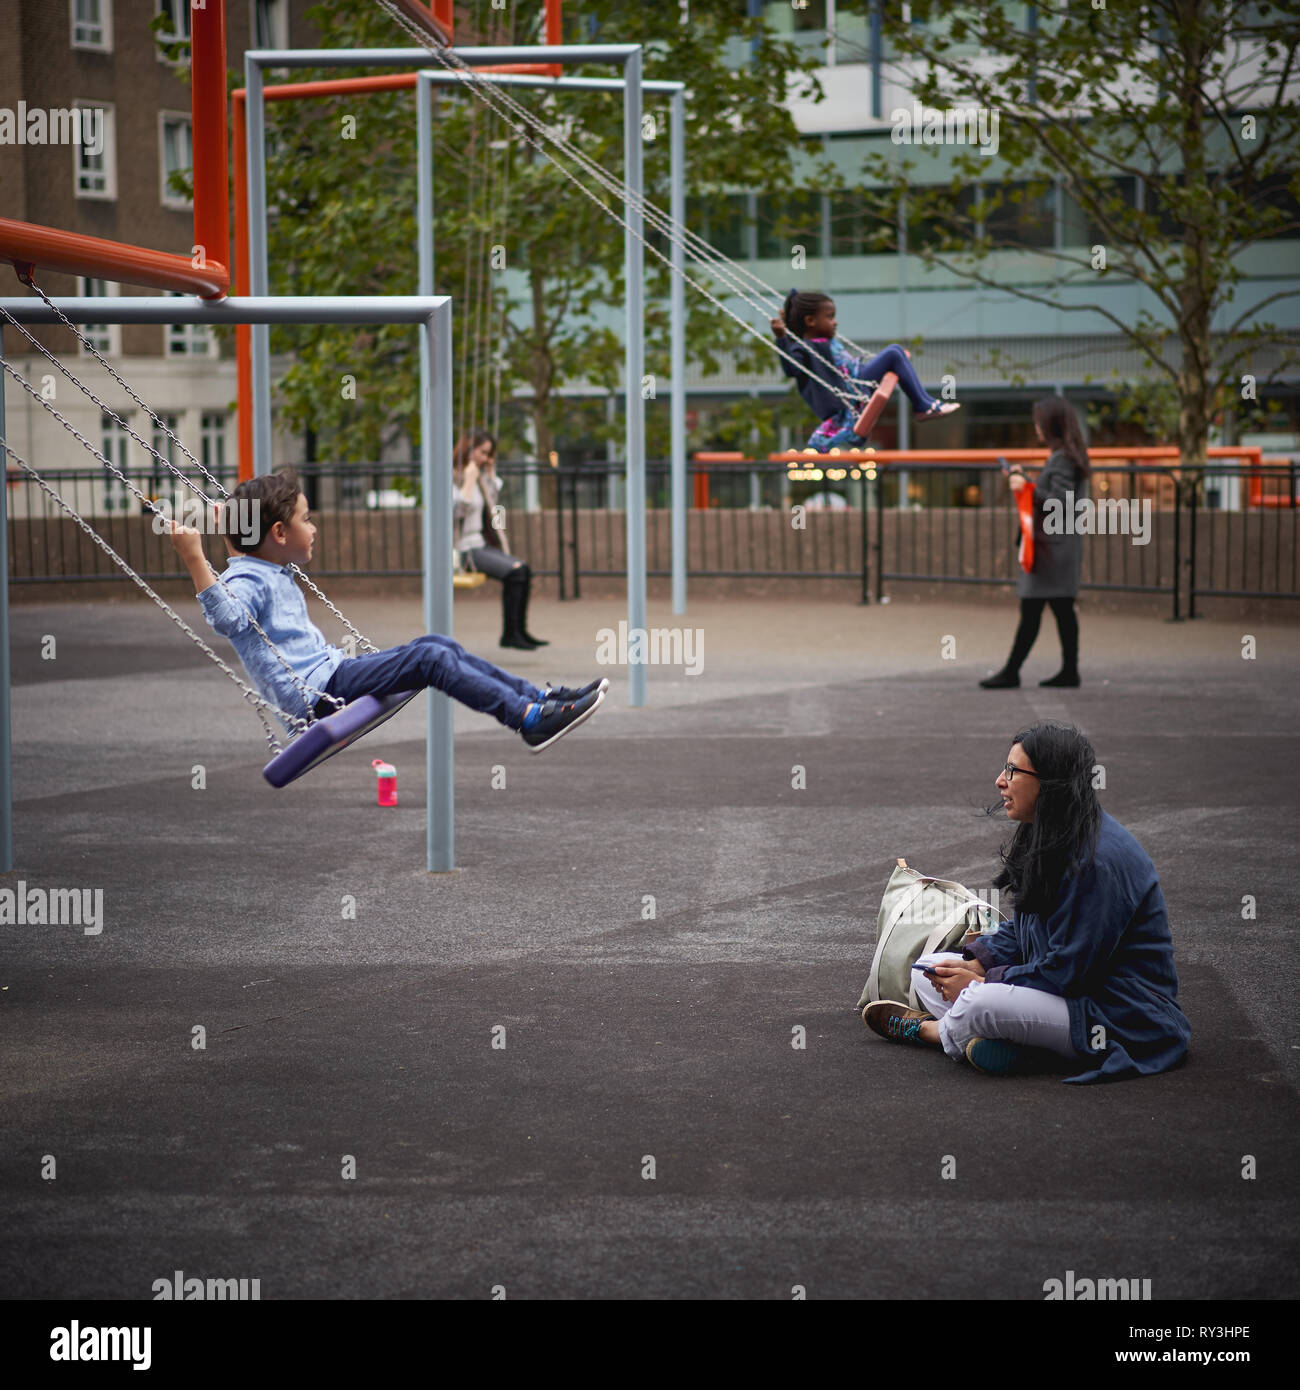 London, UK - October, 2018. Kids playing on swings outside the Tate Modern Museum in South Bank. Stock Photo